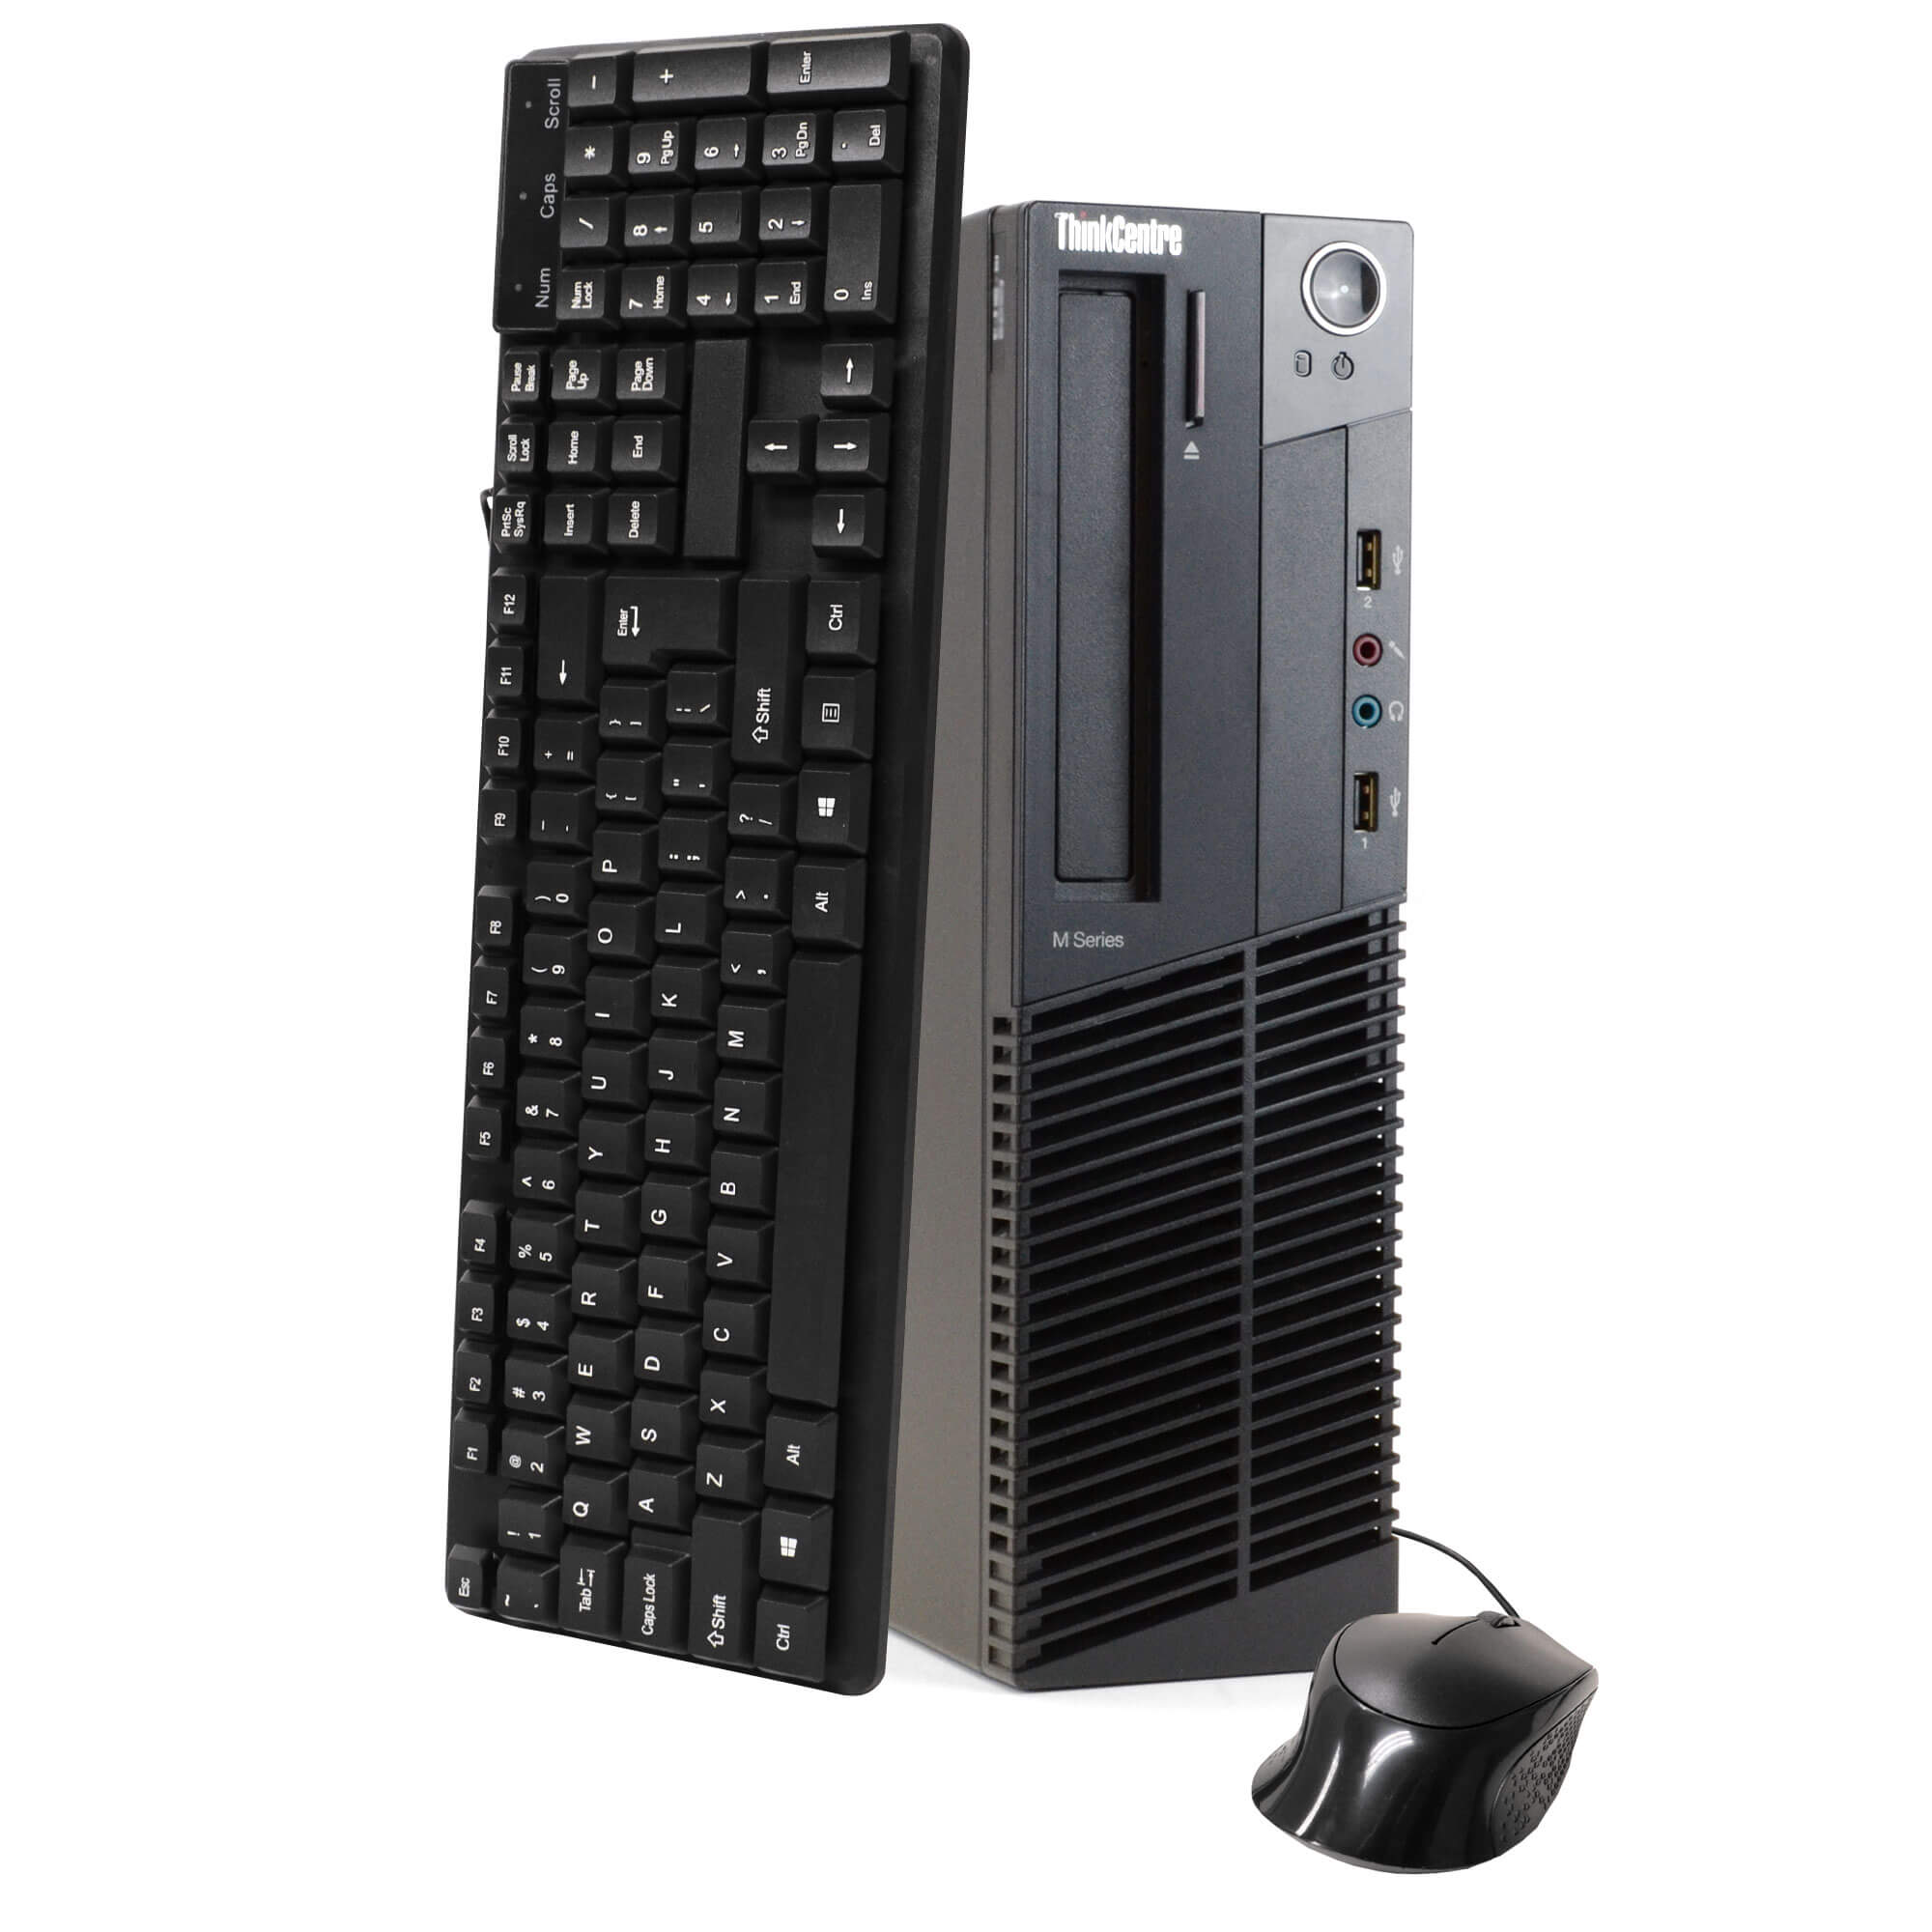 IBM ThinkCentre M92P Desktop Computer PC, Intel Quad-Core i5, 240GB SSD, 8GB DDR3 RAM, Windows 10 Home, DVD, WIFI, USB Keyboard and Mouse (Used - Like New) - image 1 of 7